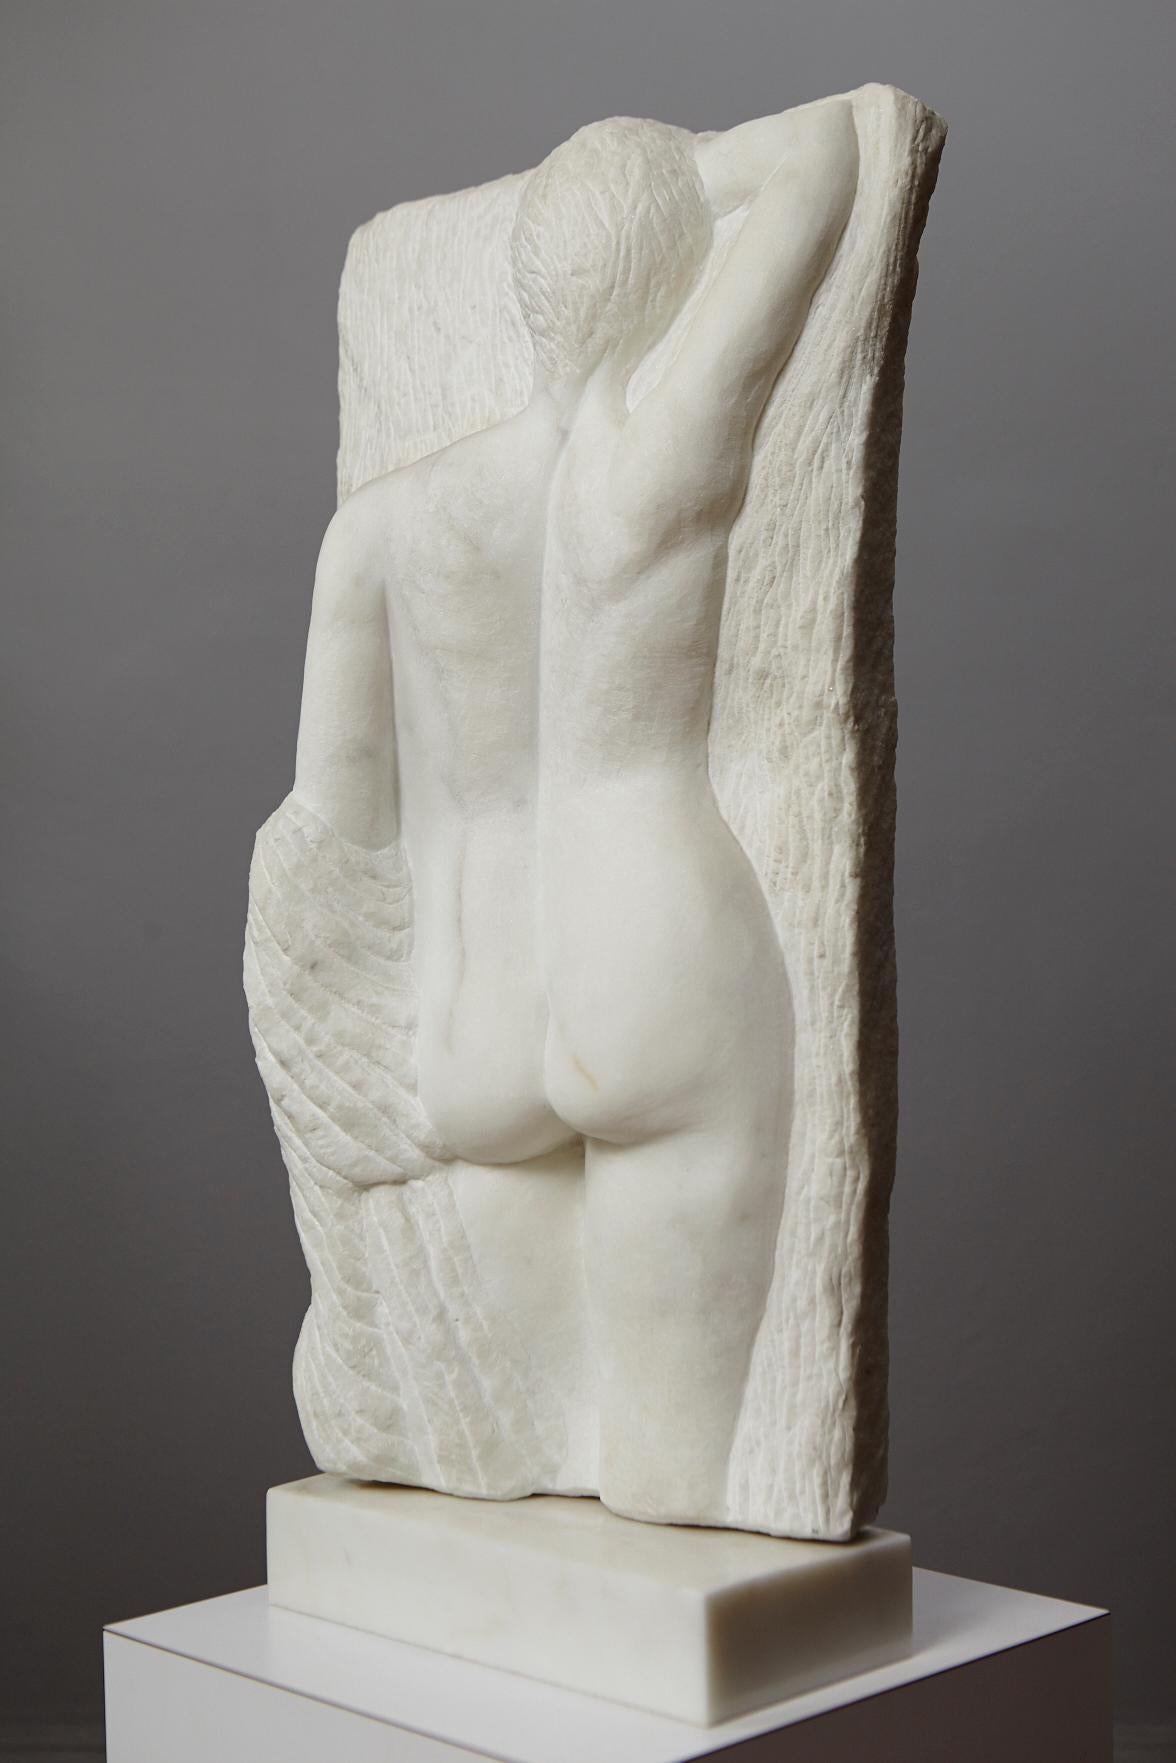 After The Bath - Contemporary Sculpture by Dolores Singer